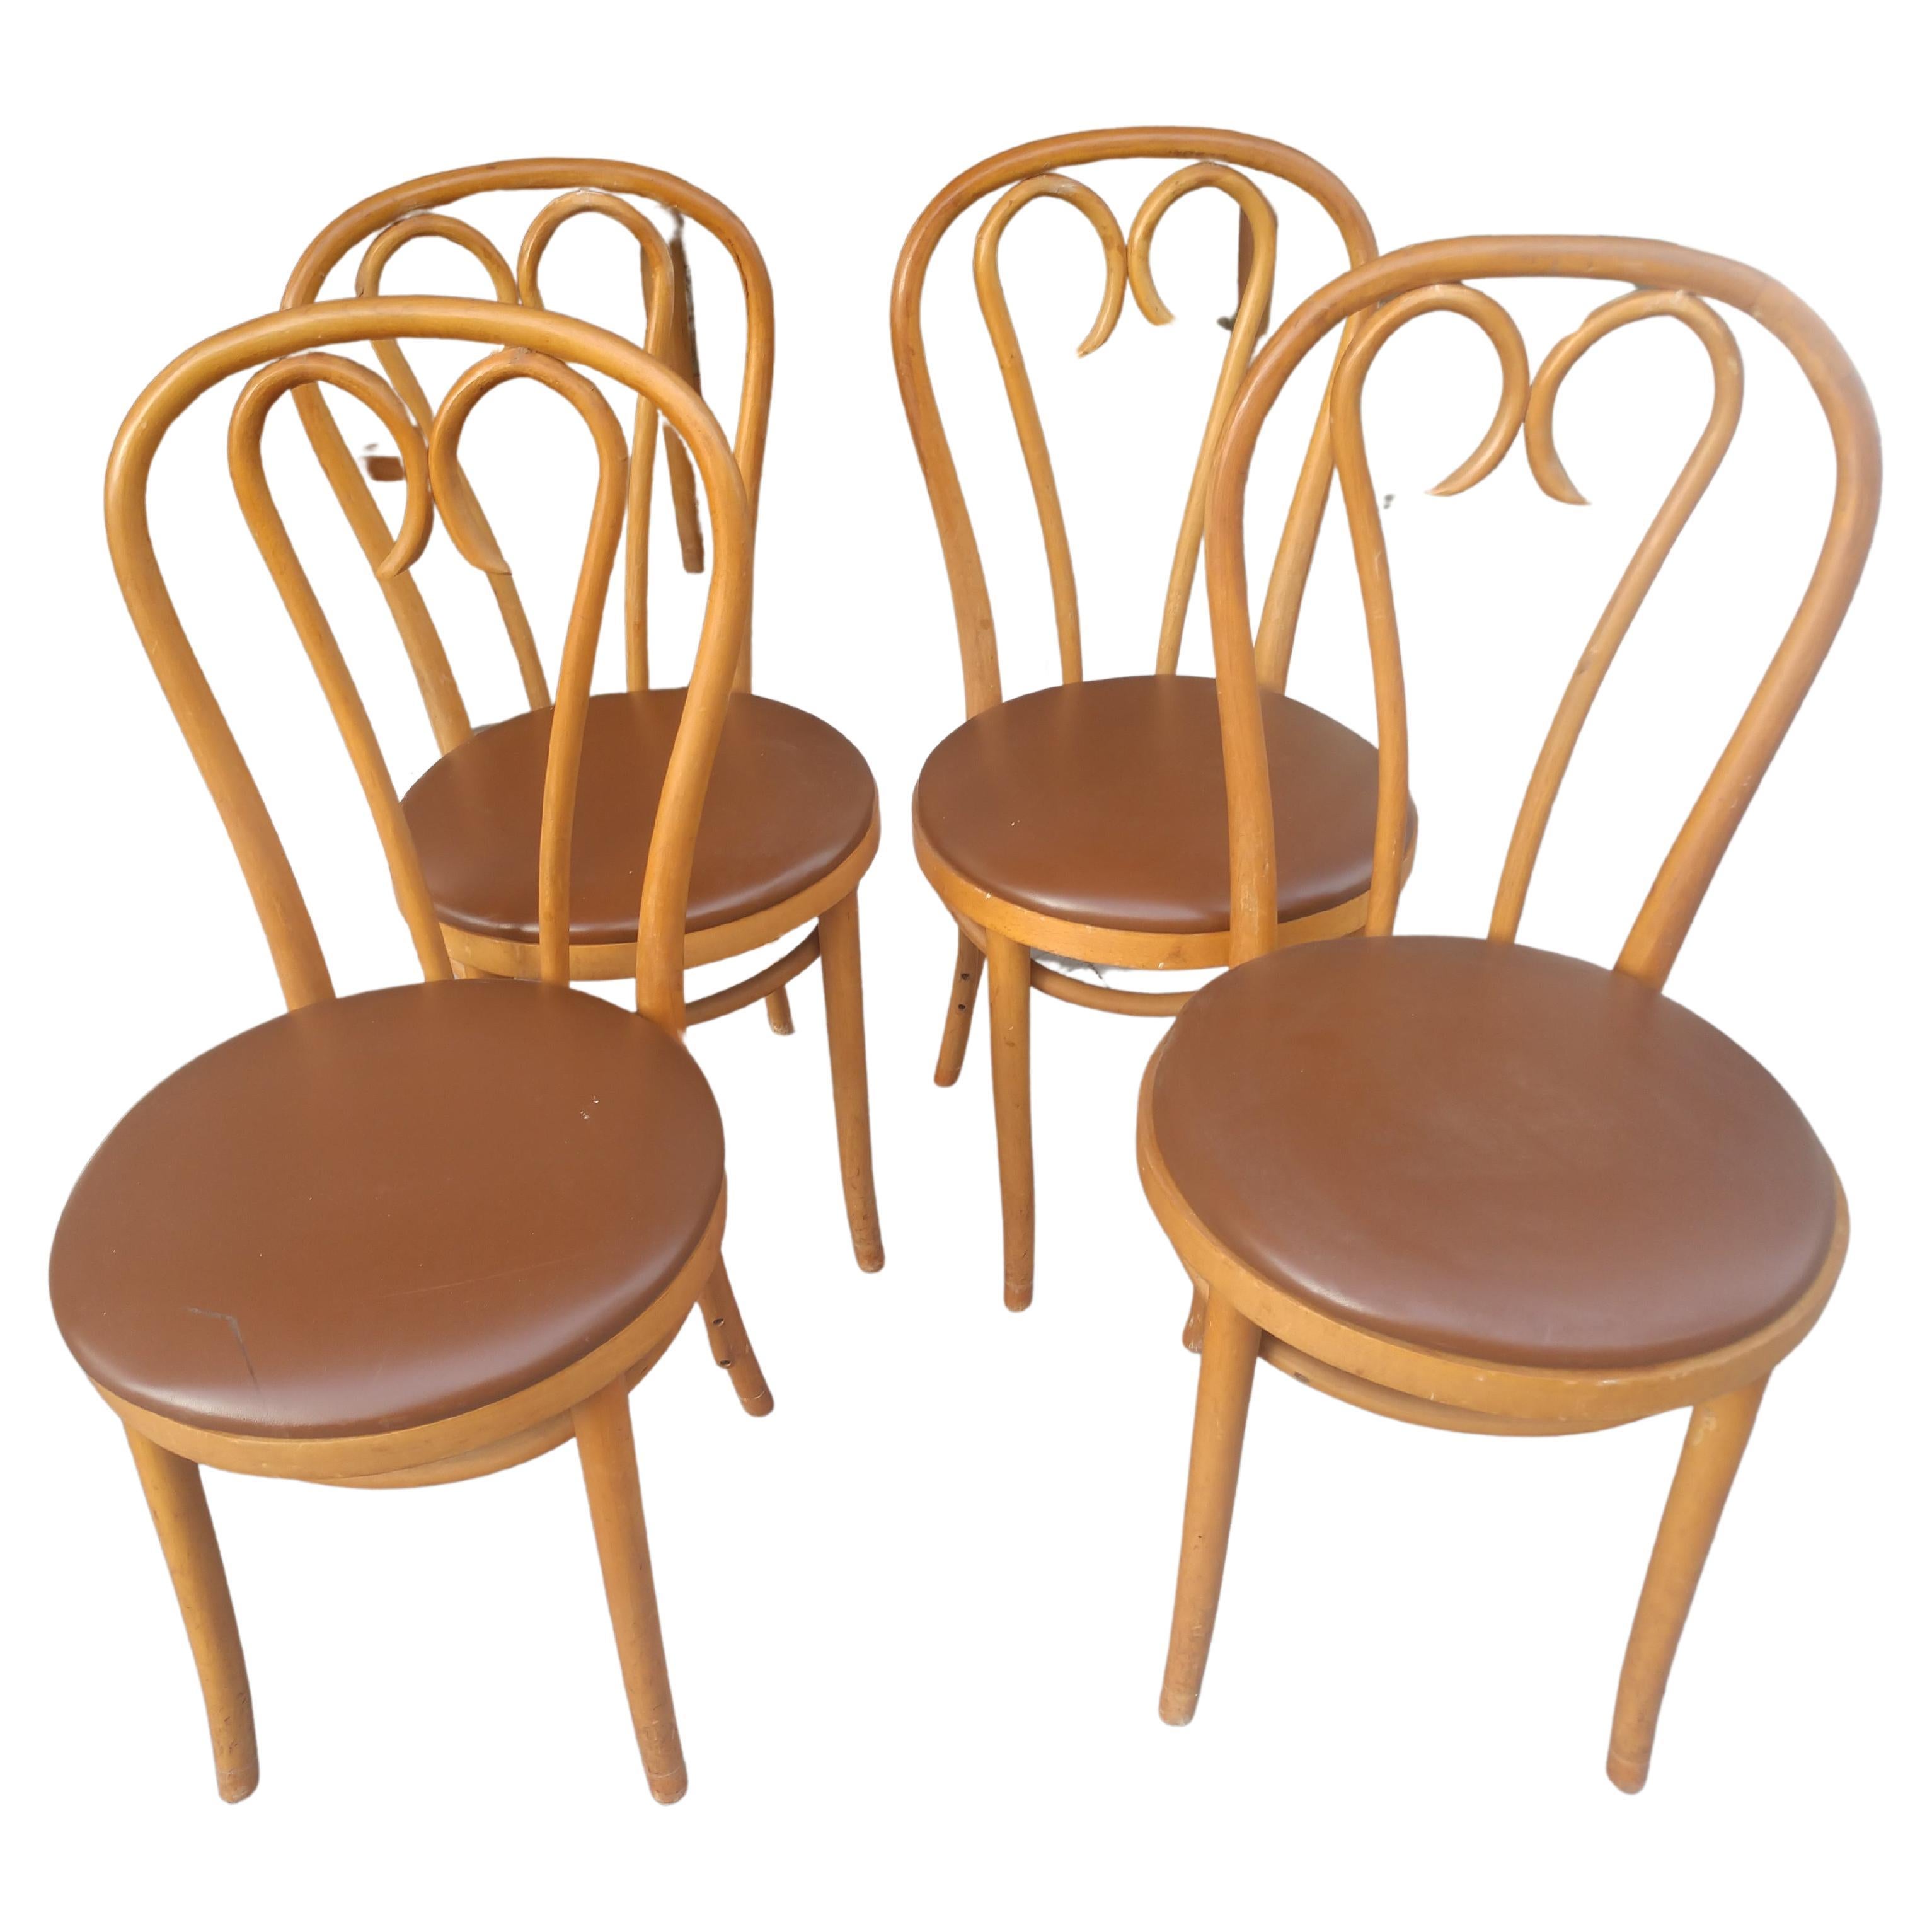 Set of Four Thonet Bentwood Cafe Dining Chairs Romania